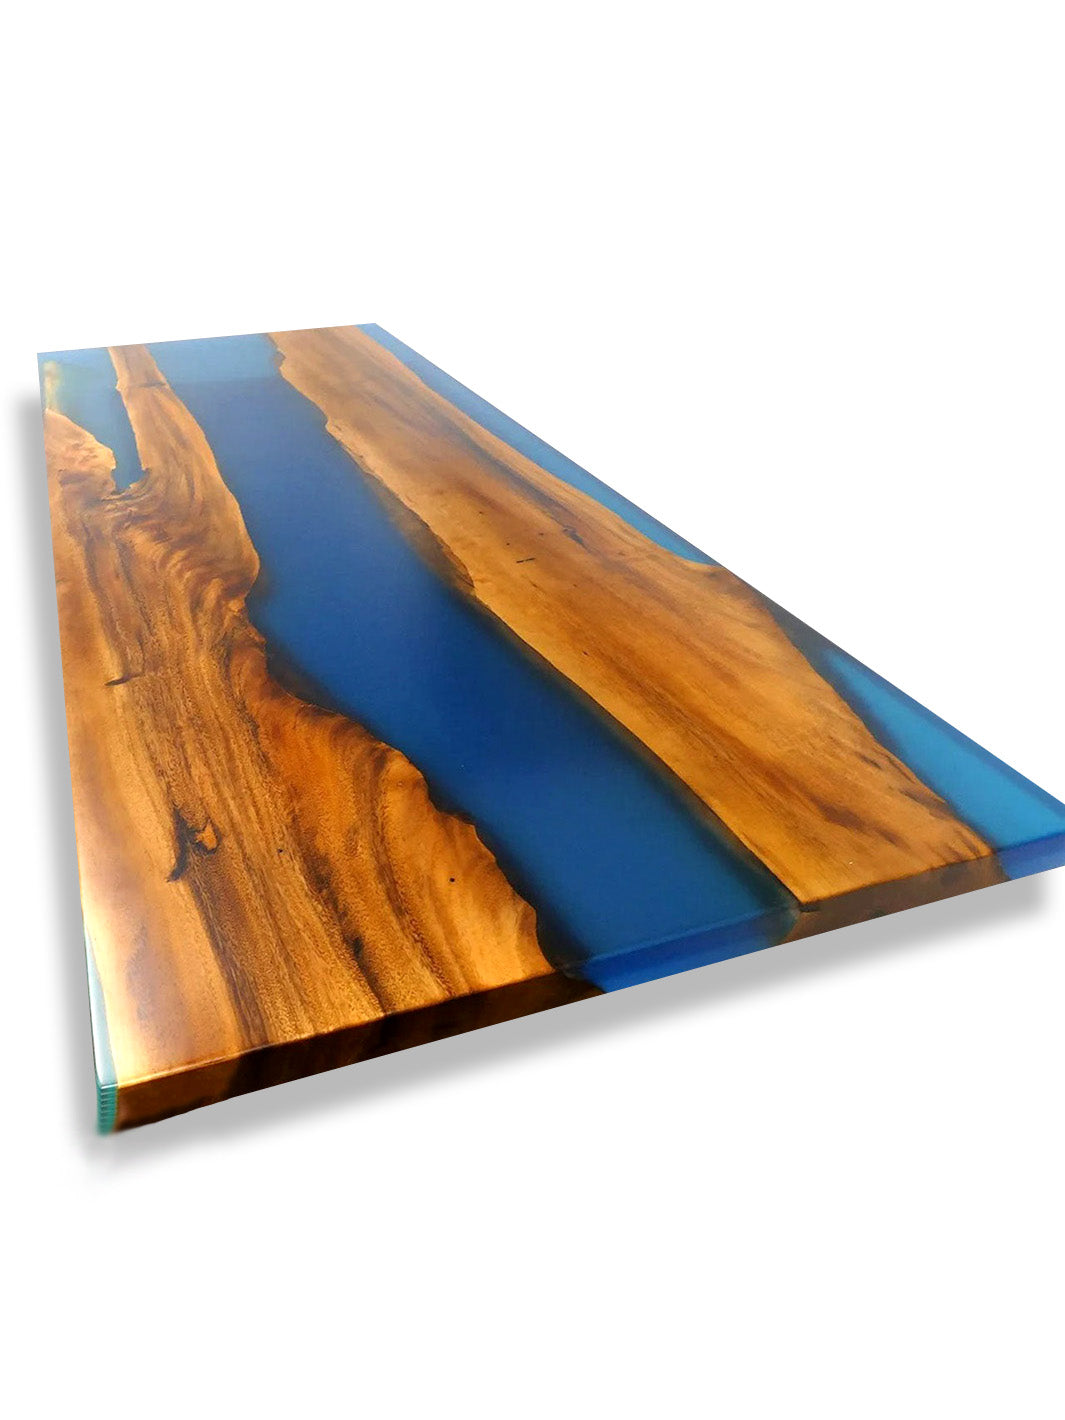 Handcrafted River Beach Epoxy Resin Wooden Dining Table | 170x70cm Made 4 Decor Tables MDR0006